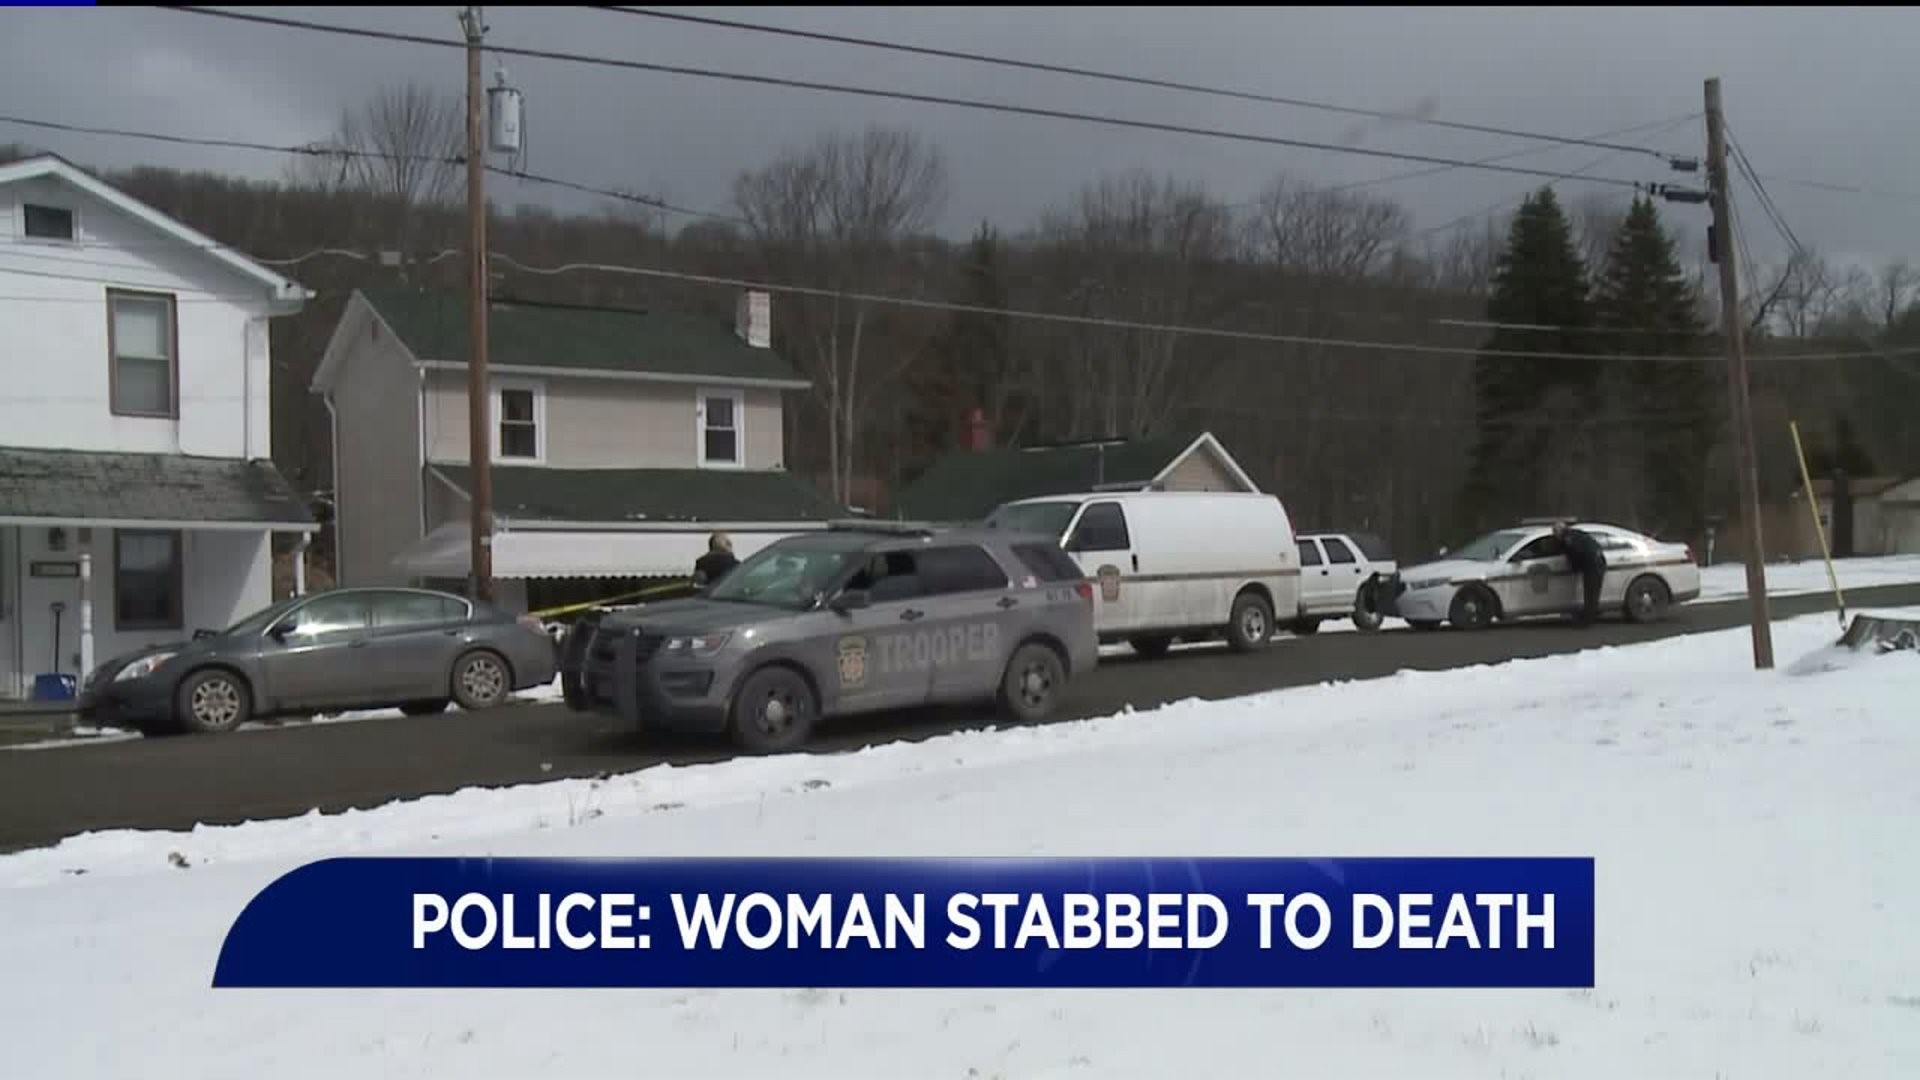 Two in Custody in Stabbing Death Investigation in Luzerne County